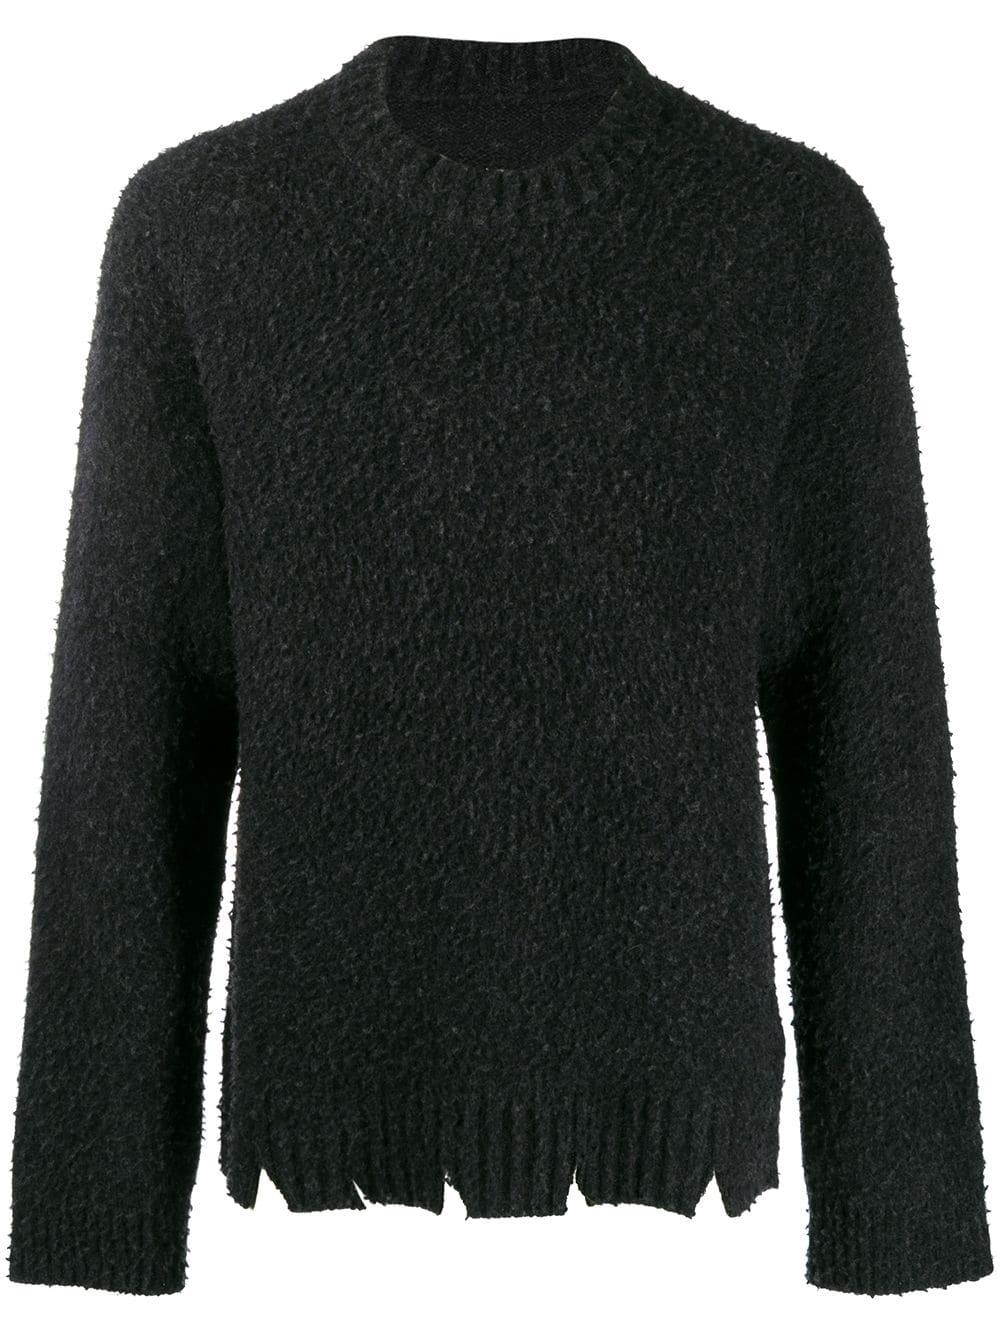 Maison Margiela Wool Distressed Chunky Knit Sweater in Black for Men ...